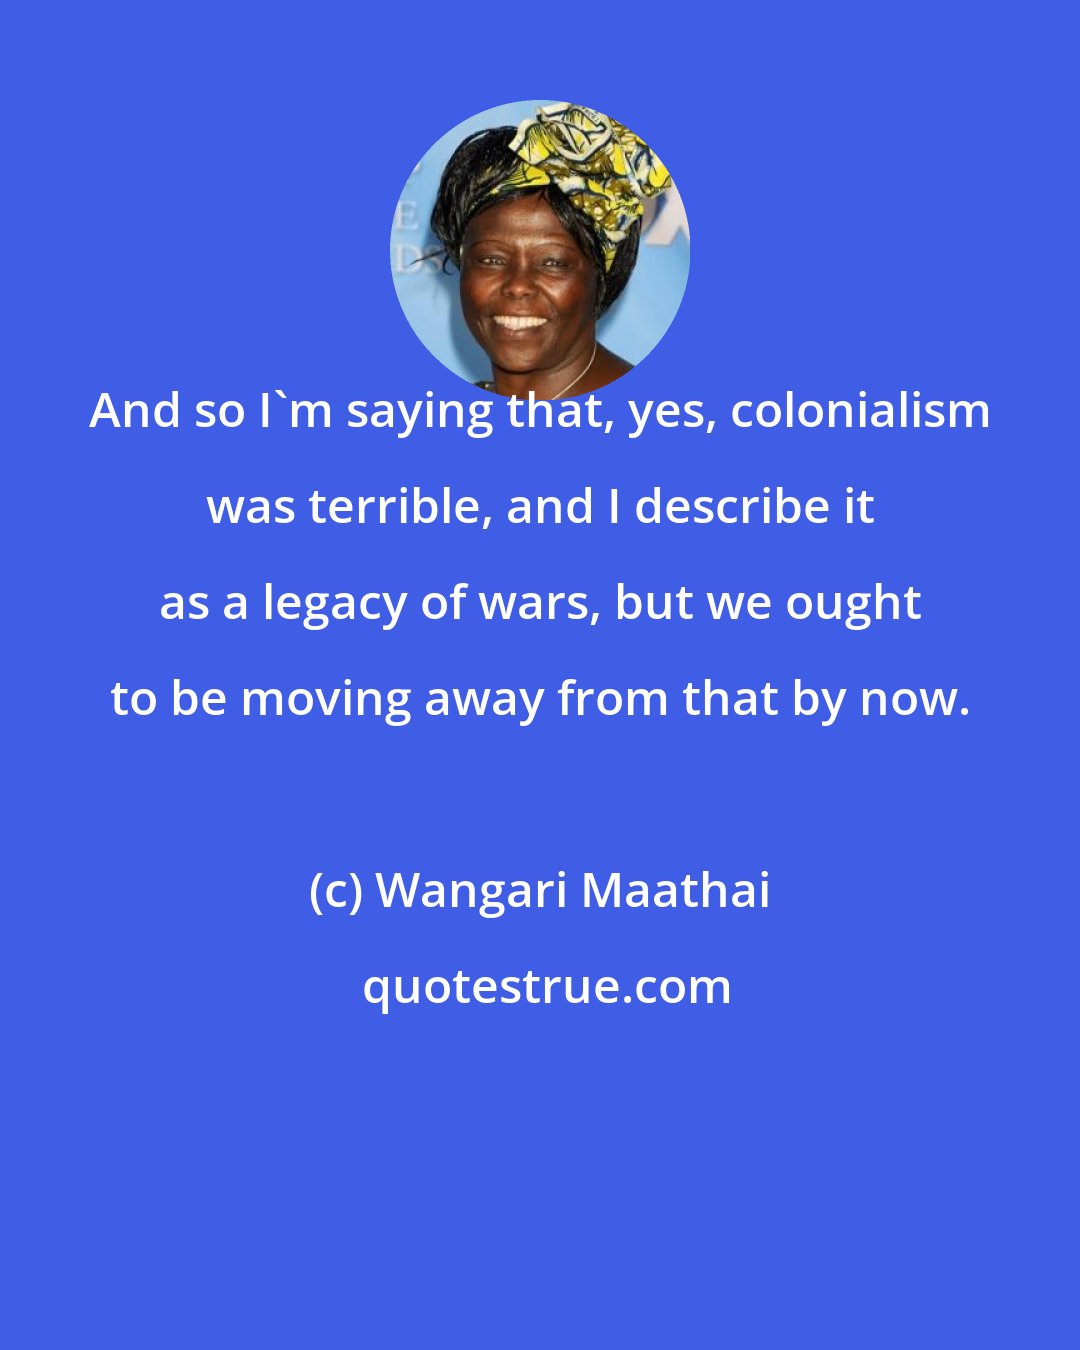 Wangari Maathai: And so I'm saying that, yes, colonialism was terrible, and I describe it as a legacy of wars, but we ought to be moving away from that by now.